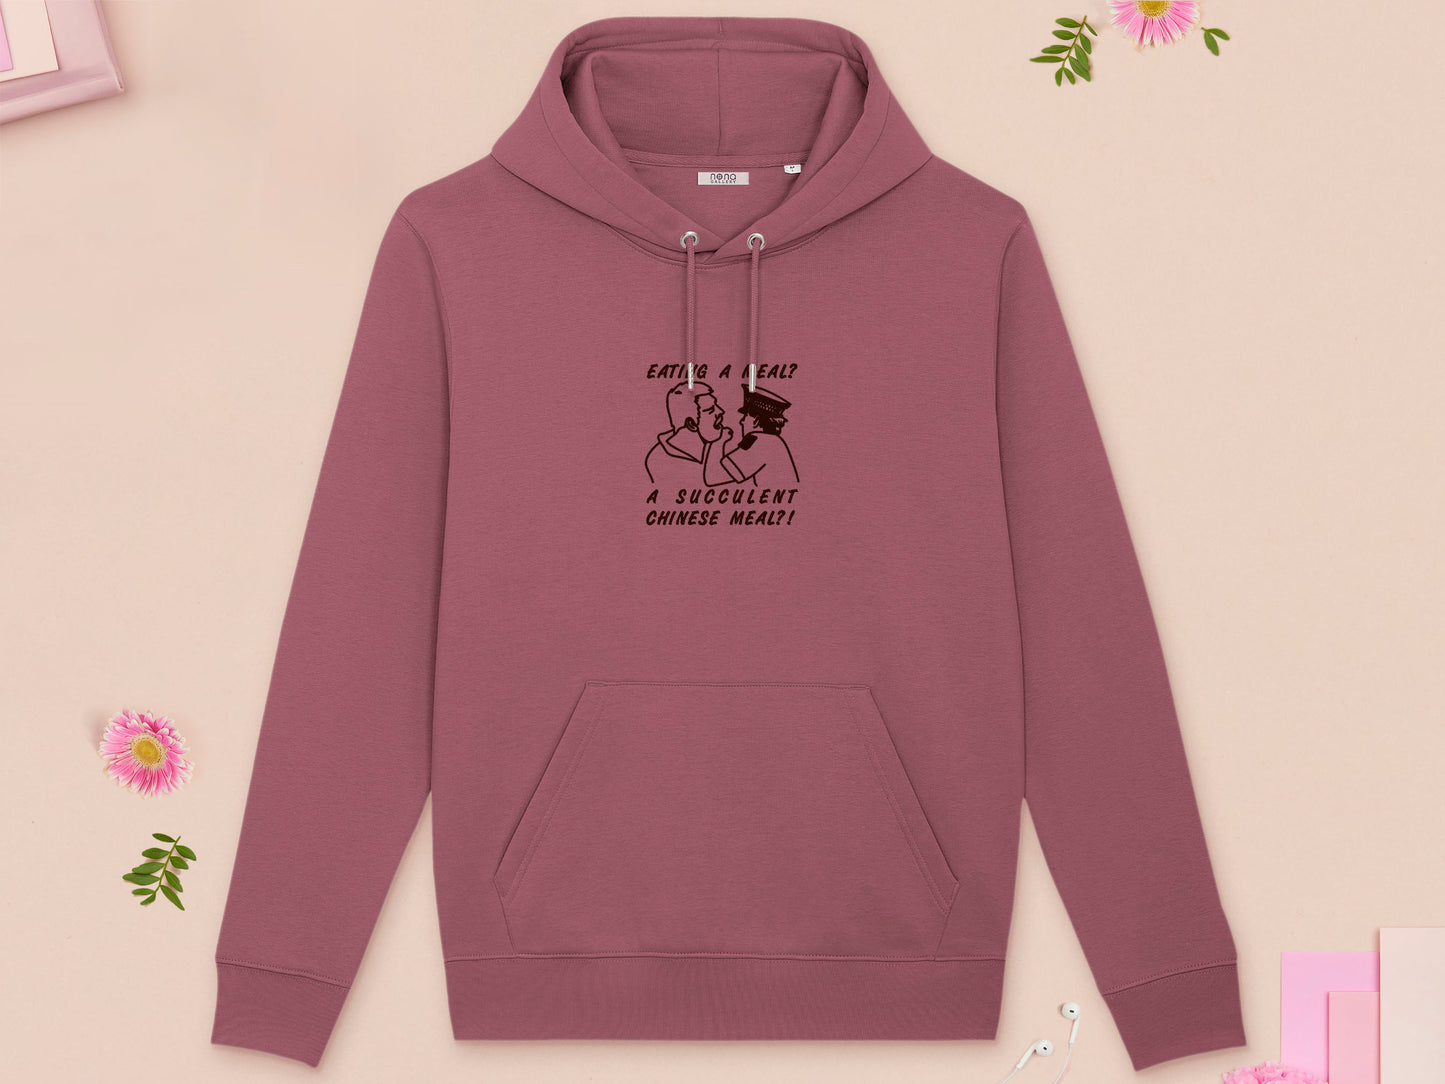 A red long sleeve fleece hoodie, with an embroidered brown thread design of the viral democracy manifest video of Charles Dozsa being arrested by a policeman with the text reading Eating A Meal? A Succulent Chinese Meal?!